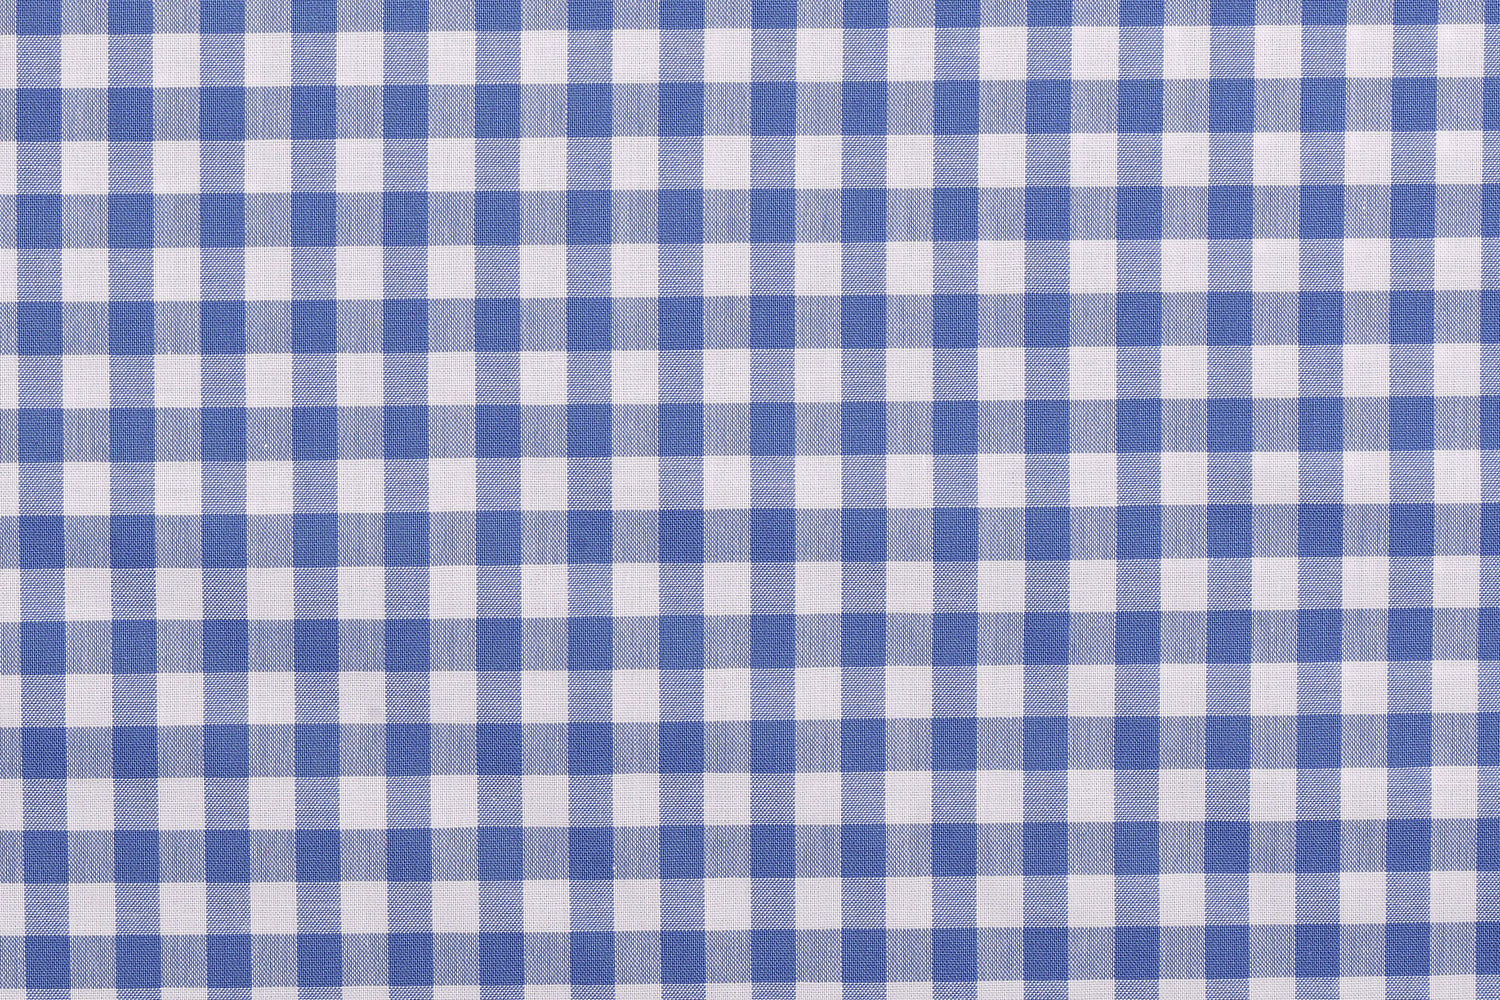 Closeup view of custom check shirts for men by Luxire light blue checks on white